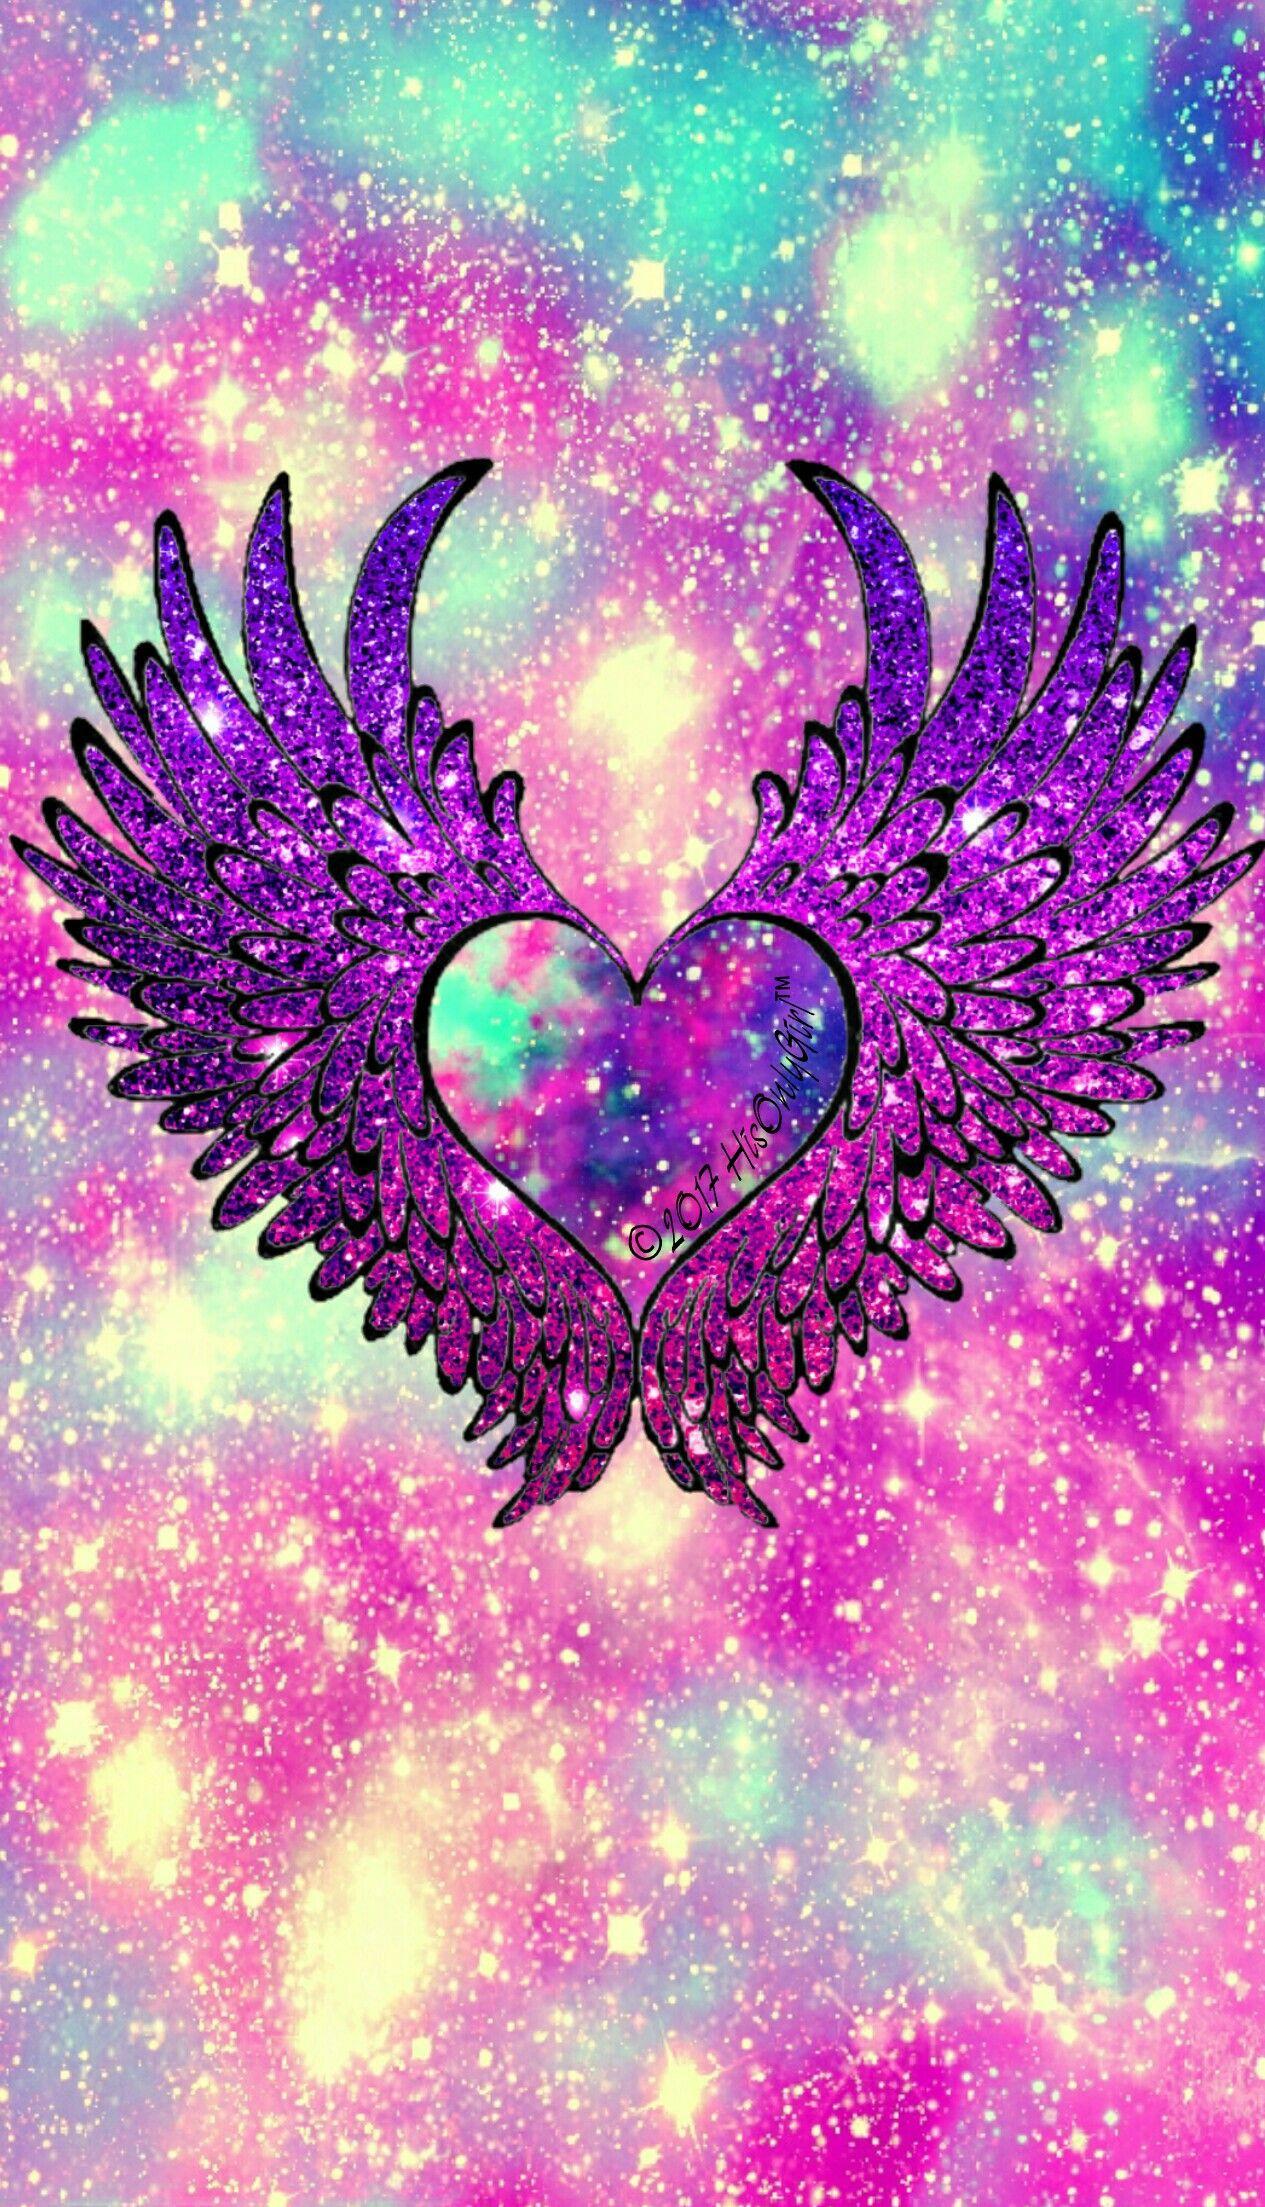 Angel heart wings galaxy wallpaper I created for the app CocoPPa